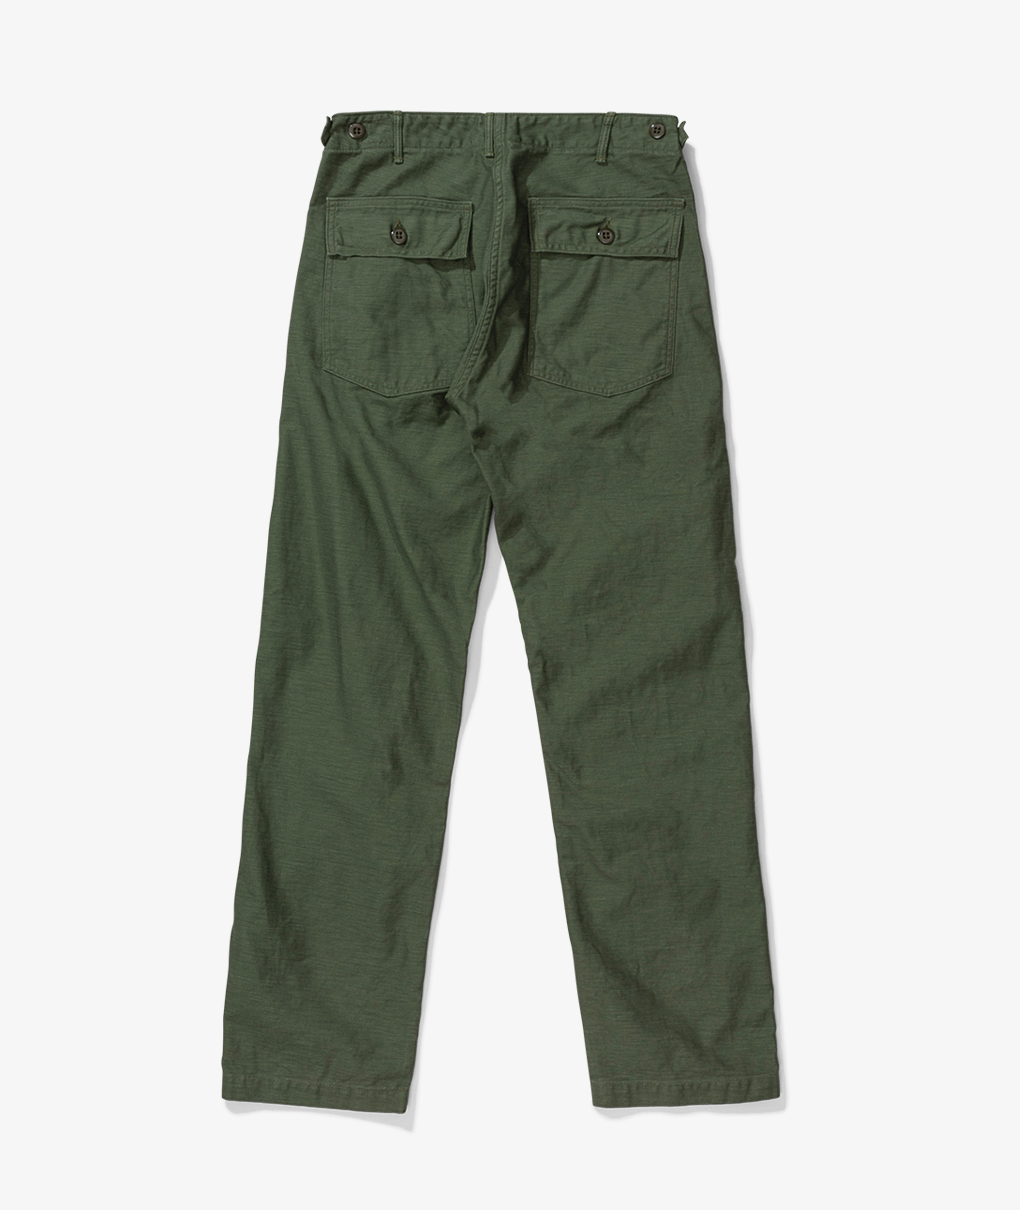 Norse Store  Shipping Worldwide - Slim Fit Fatigue Pant by orSlow